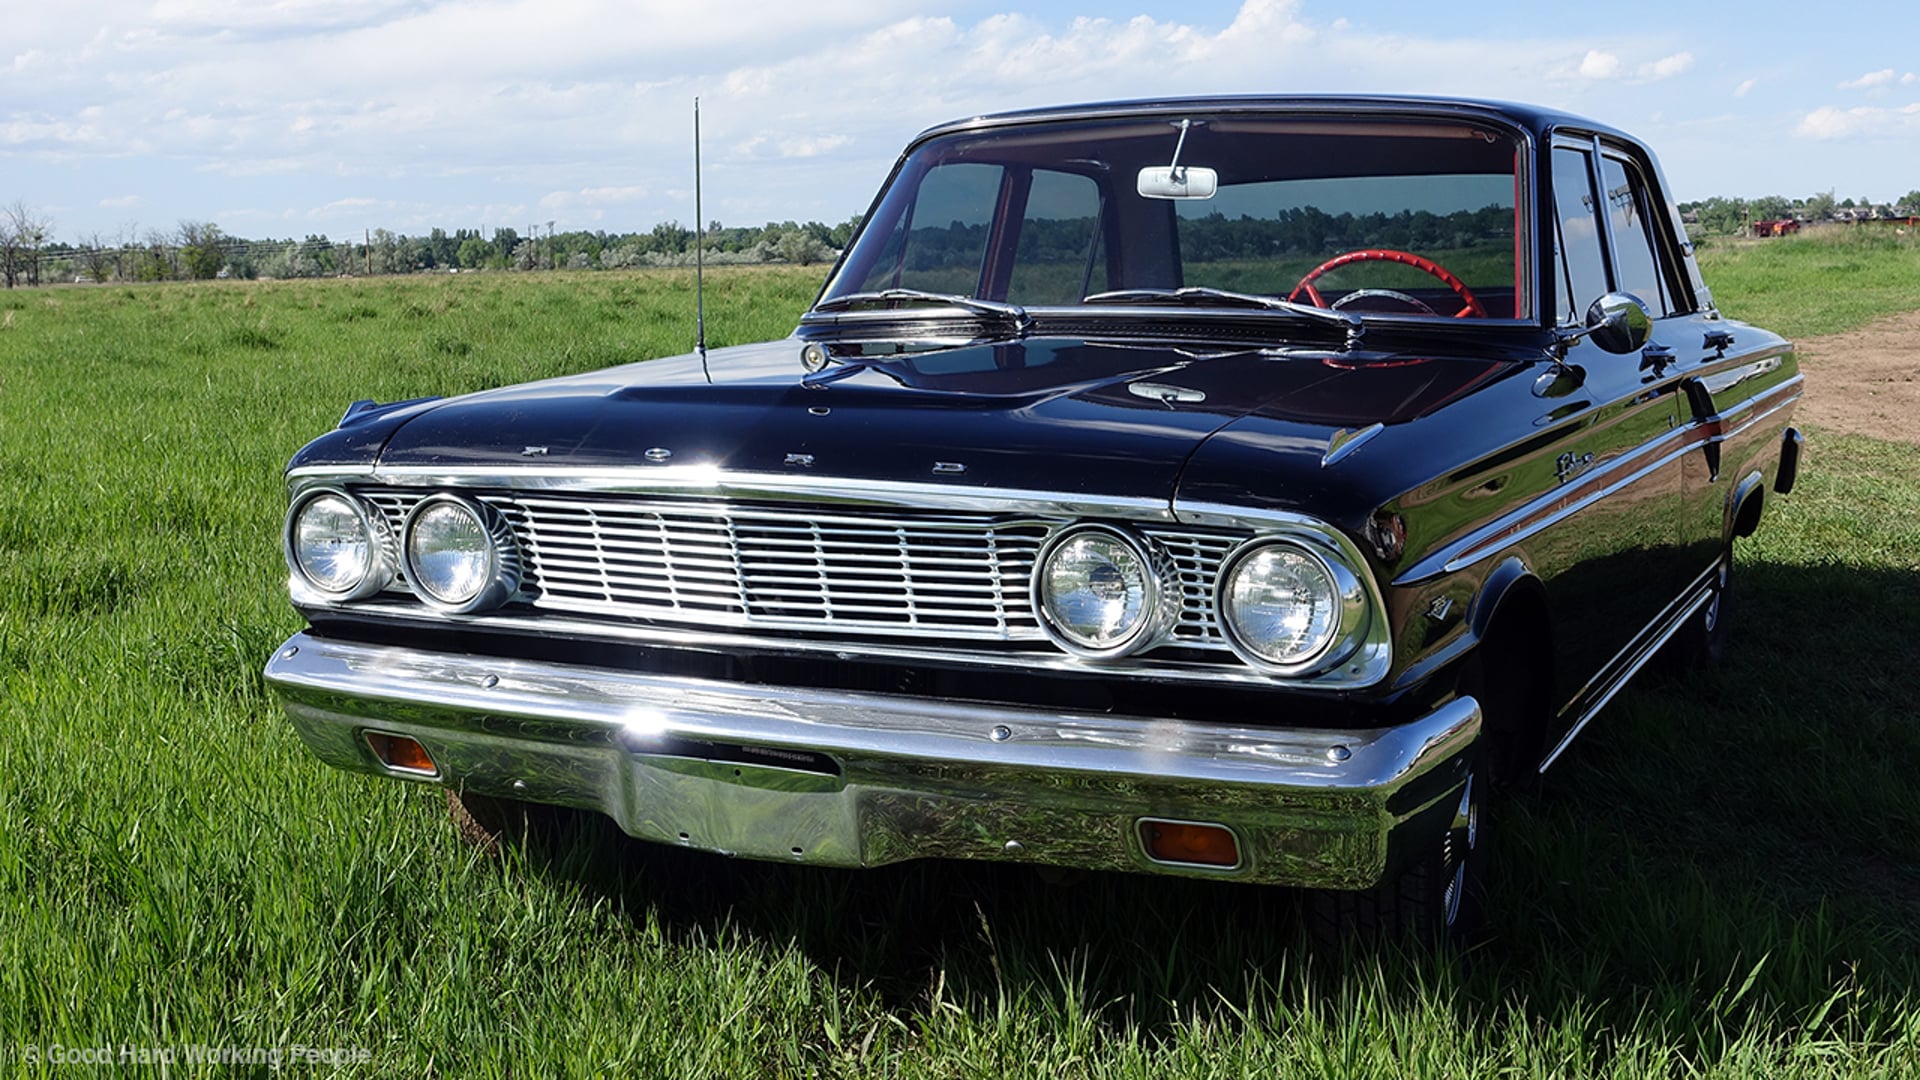 1964 Ford Fairlane 500 – In A Colorado Minute (Week 266)